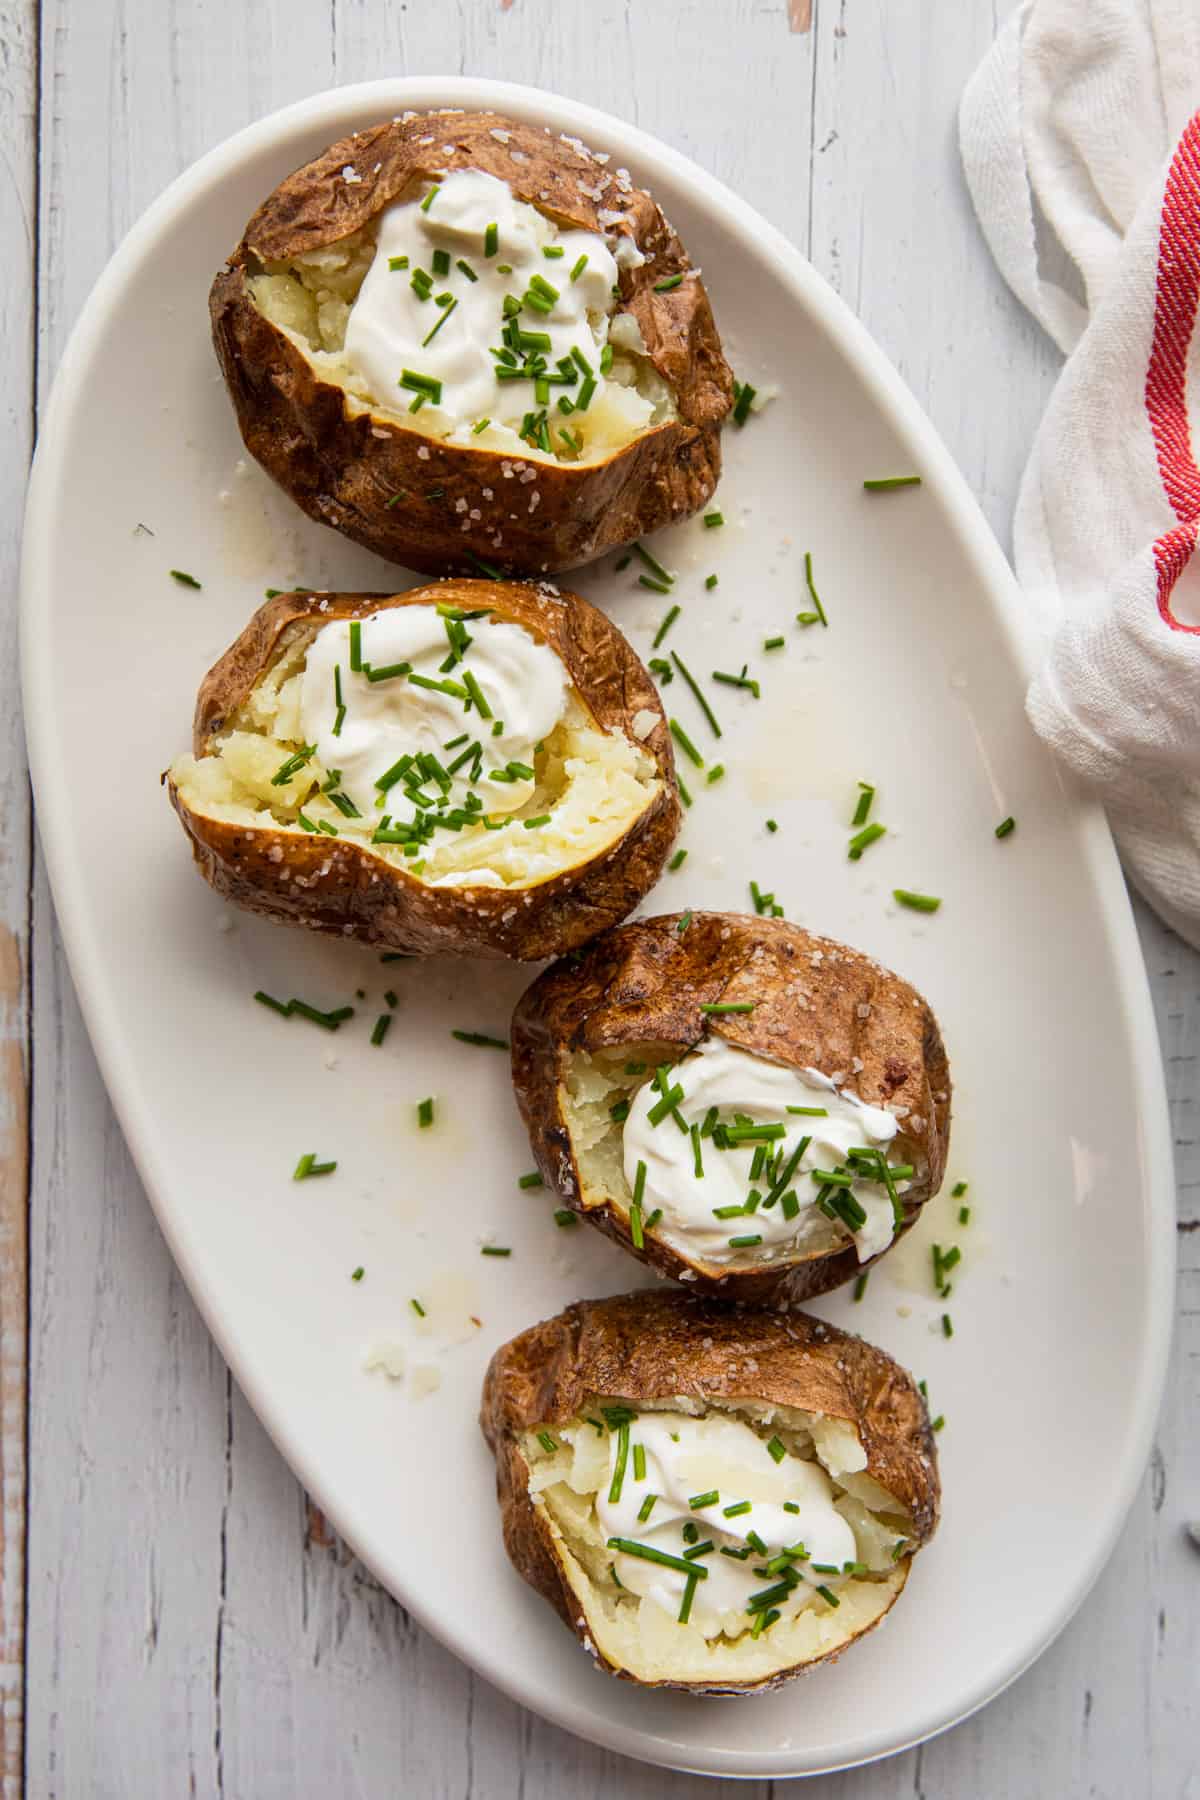 a white platter with 4 baked potatoes topped with sour cream and chives